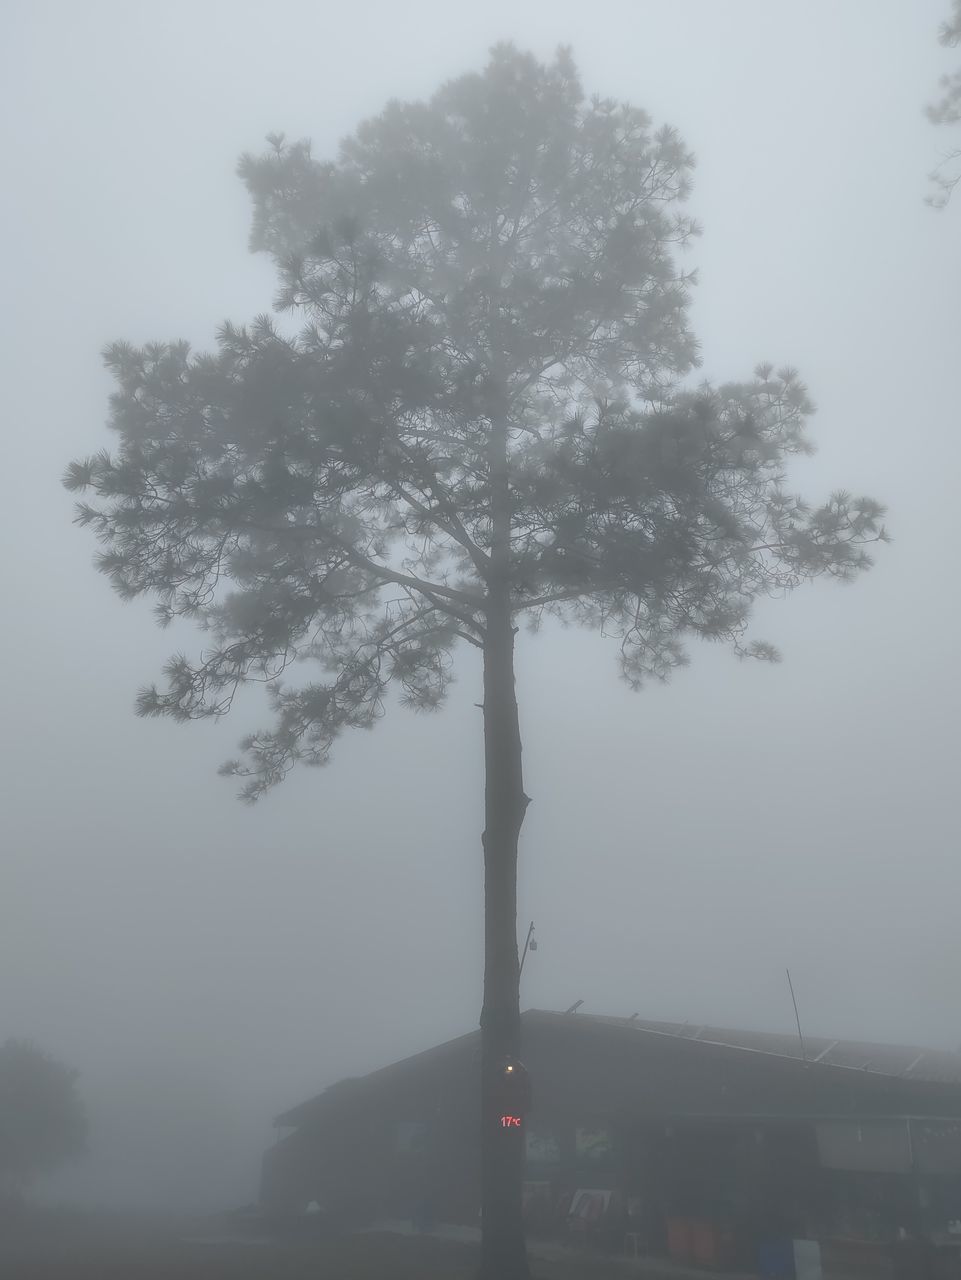 tree, fog, plant, mist, nature, haze, morning, sky, no people, beauty in nature, outdoors, day, tranquility, growth, snow, transportation, silhouette, freezing, dawn, environment, city